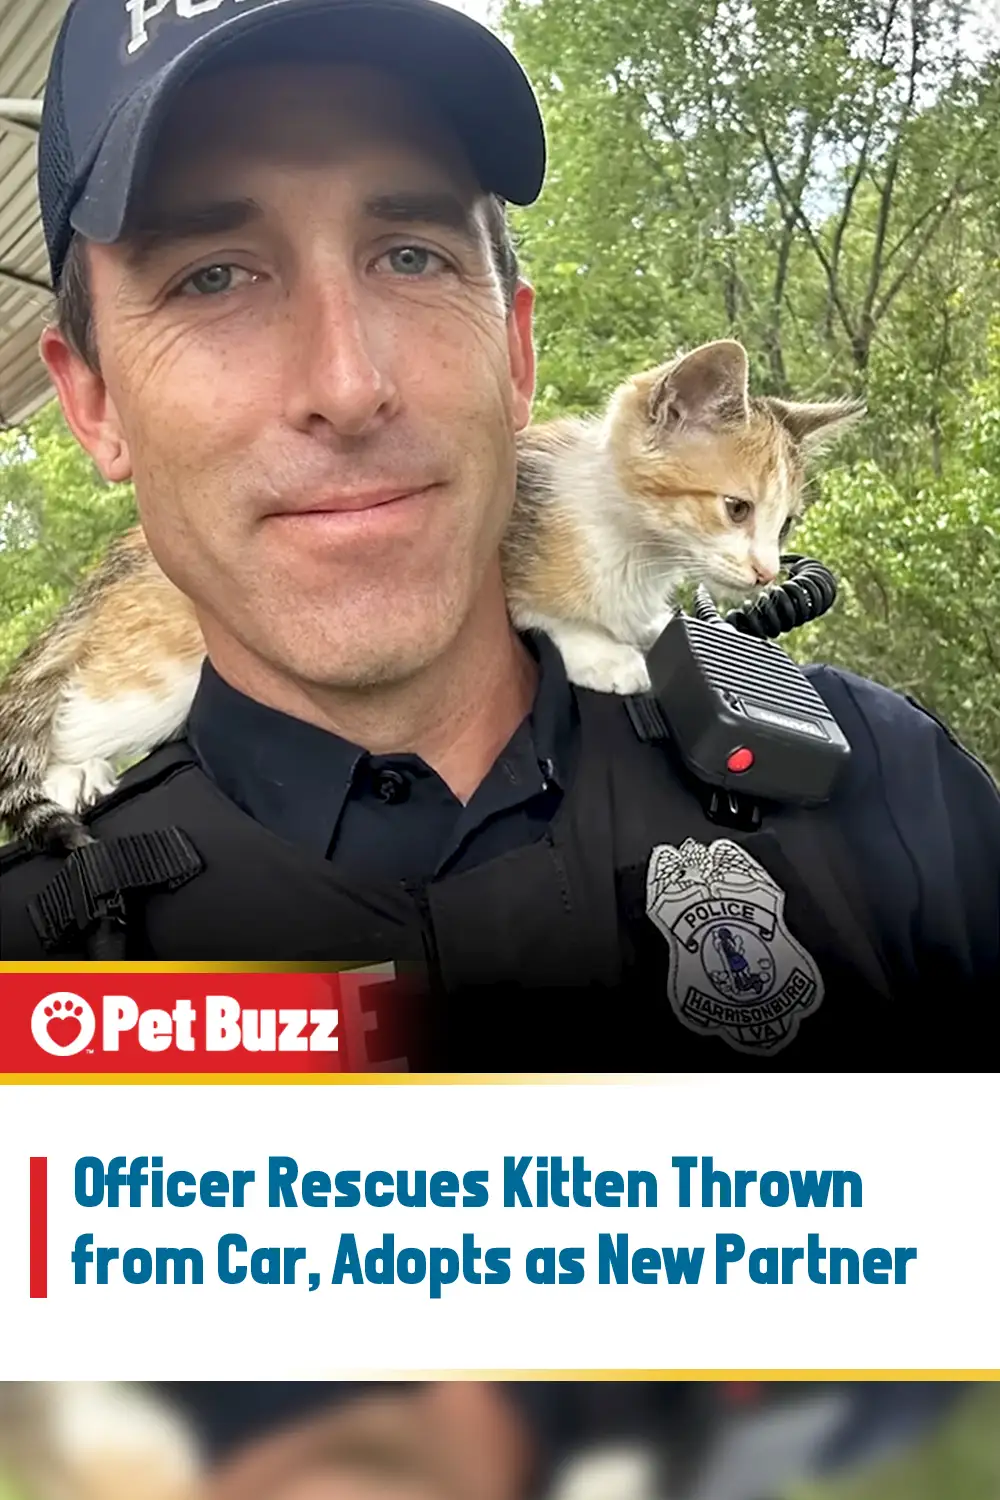 Officer Rescues Kitten Thrown from Car, Adopts as New Partner